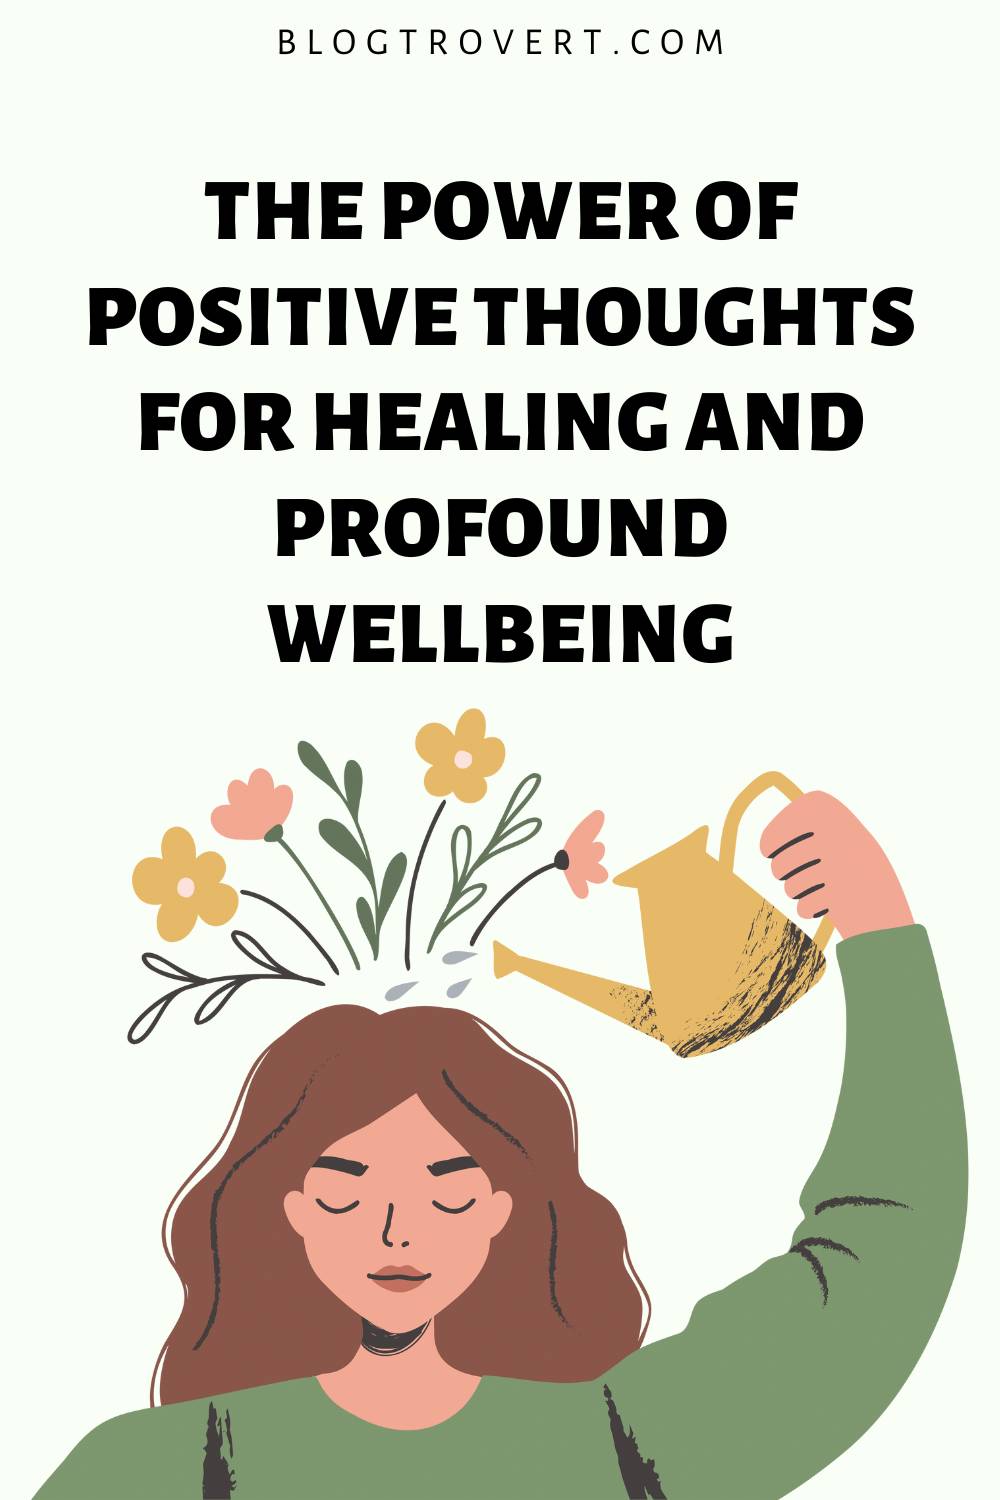 The power of positive thoughts for healing and profound wellbeing 5